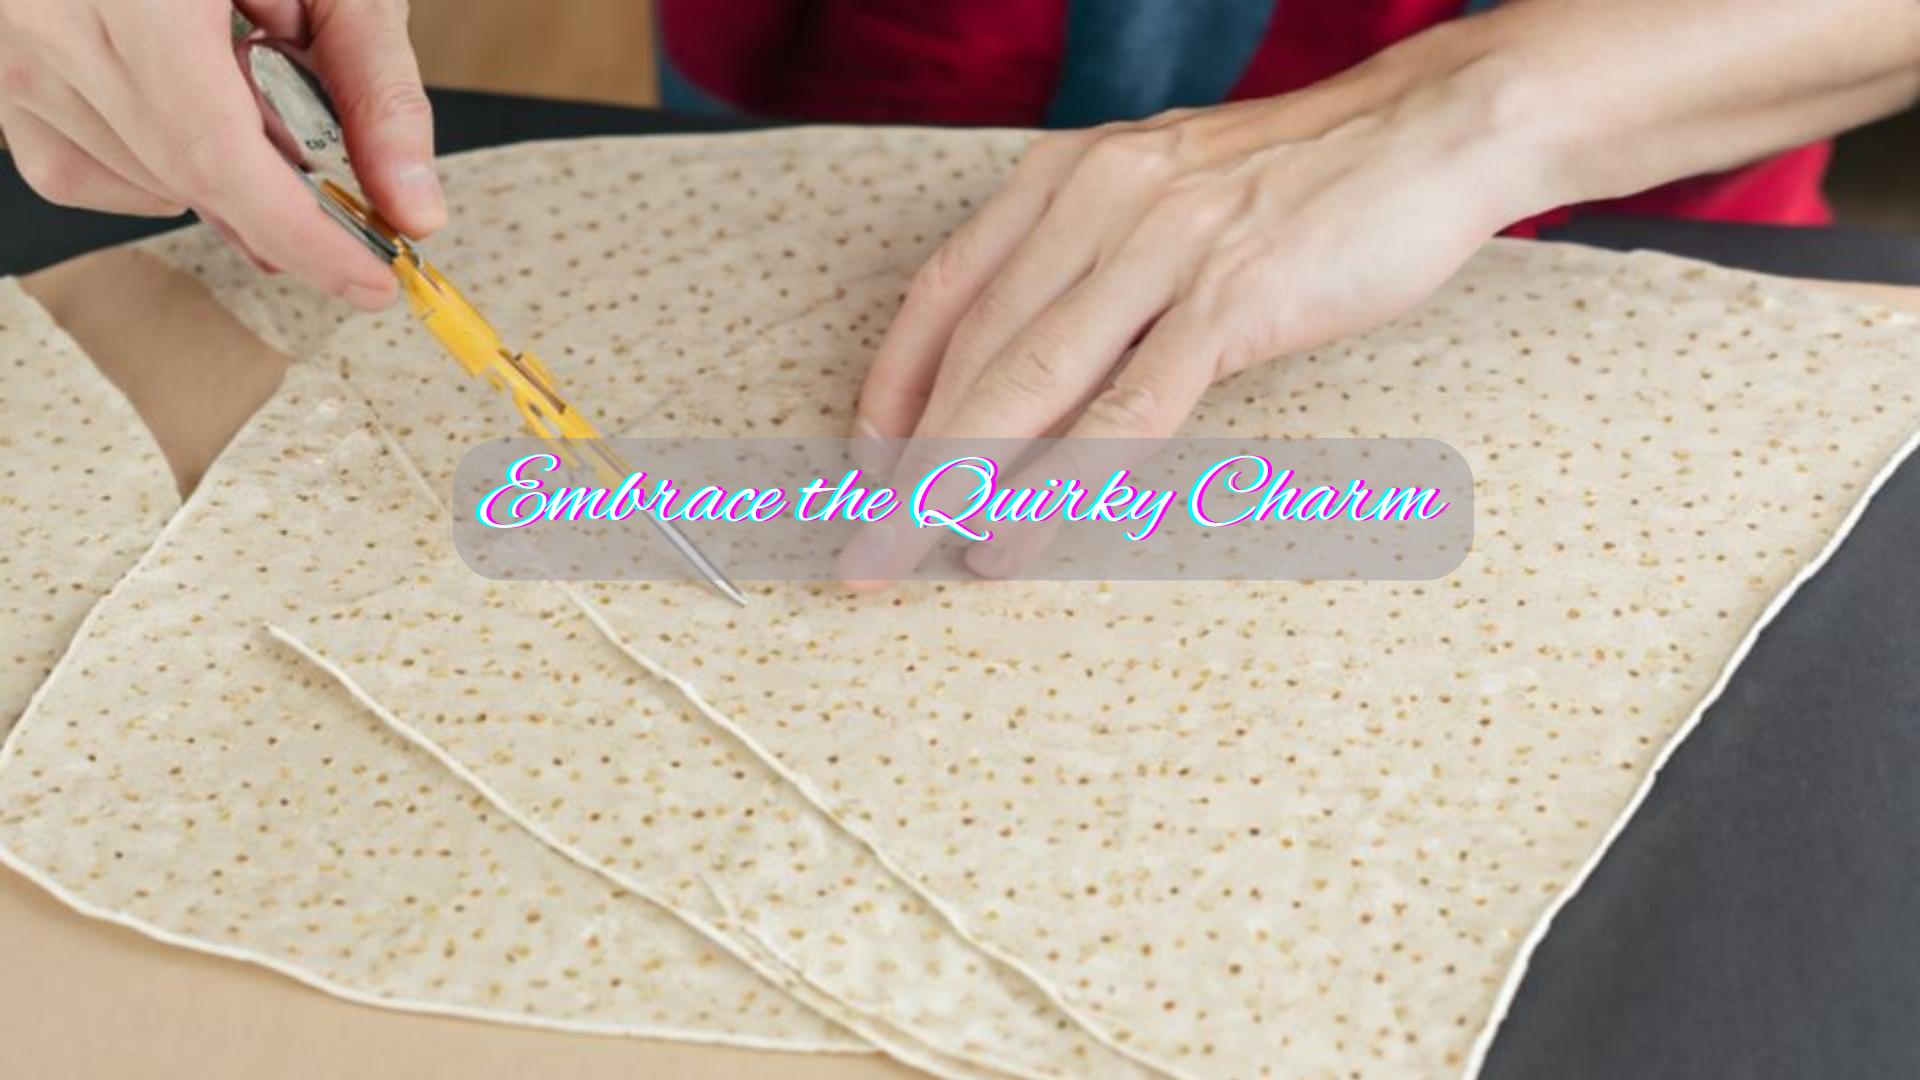 Tortilla Blanket: A Fun and Easy DIY Project